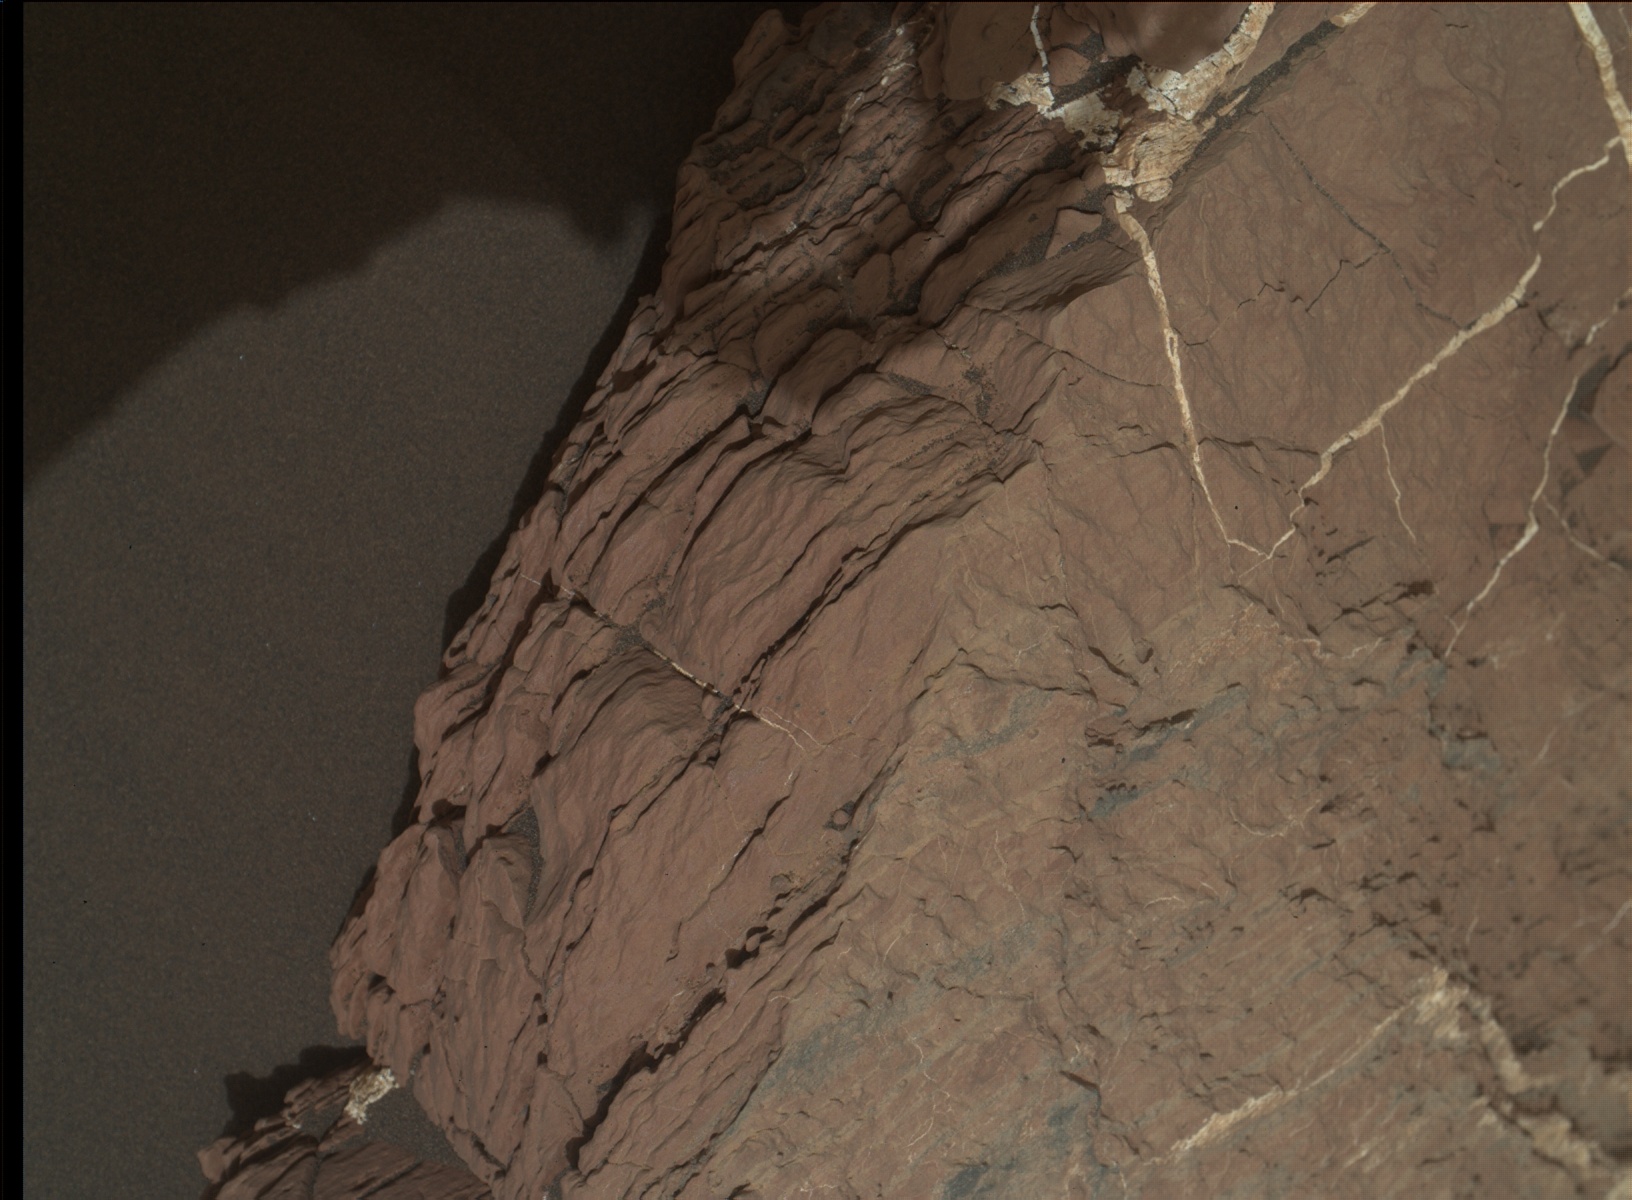 Nasa's Mars rover Curiosity acquired this image using its Mars Hand Lens Imager (MAHLI) on Sol 1605